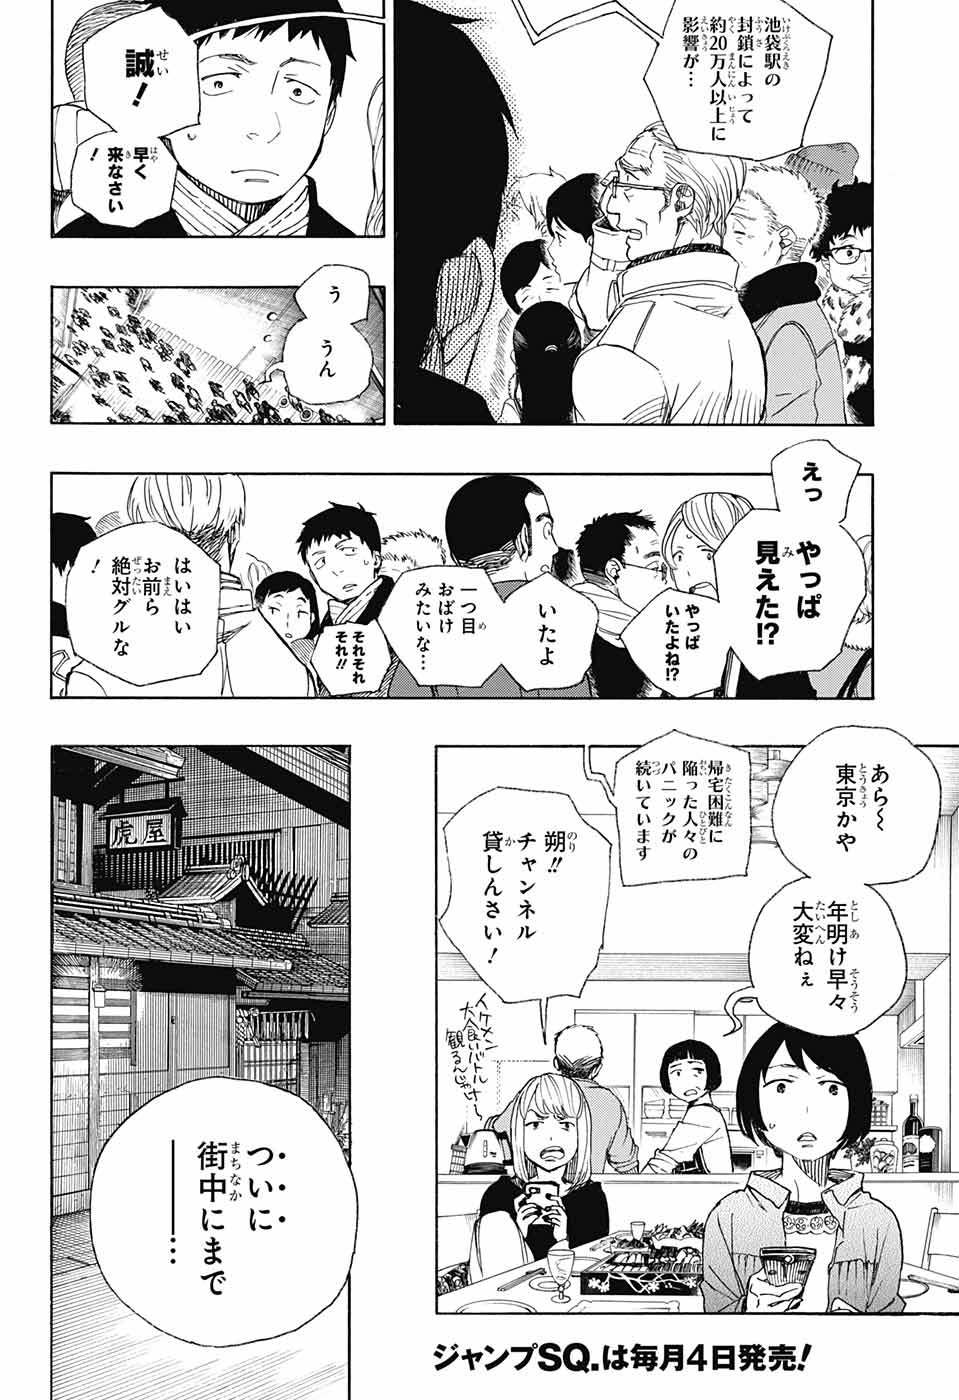 Ao no Exorcist - Chapter 92 - Page 2